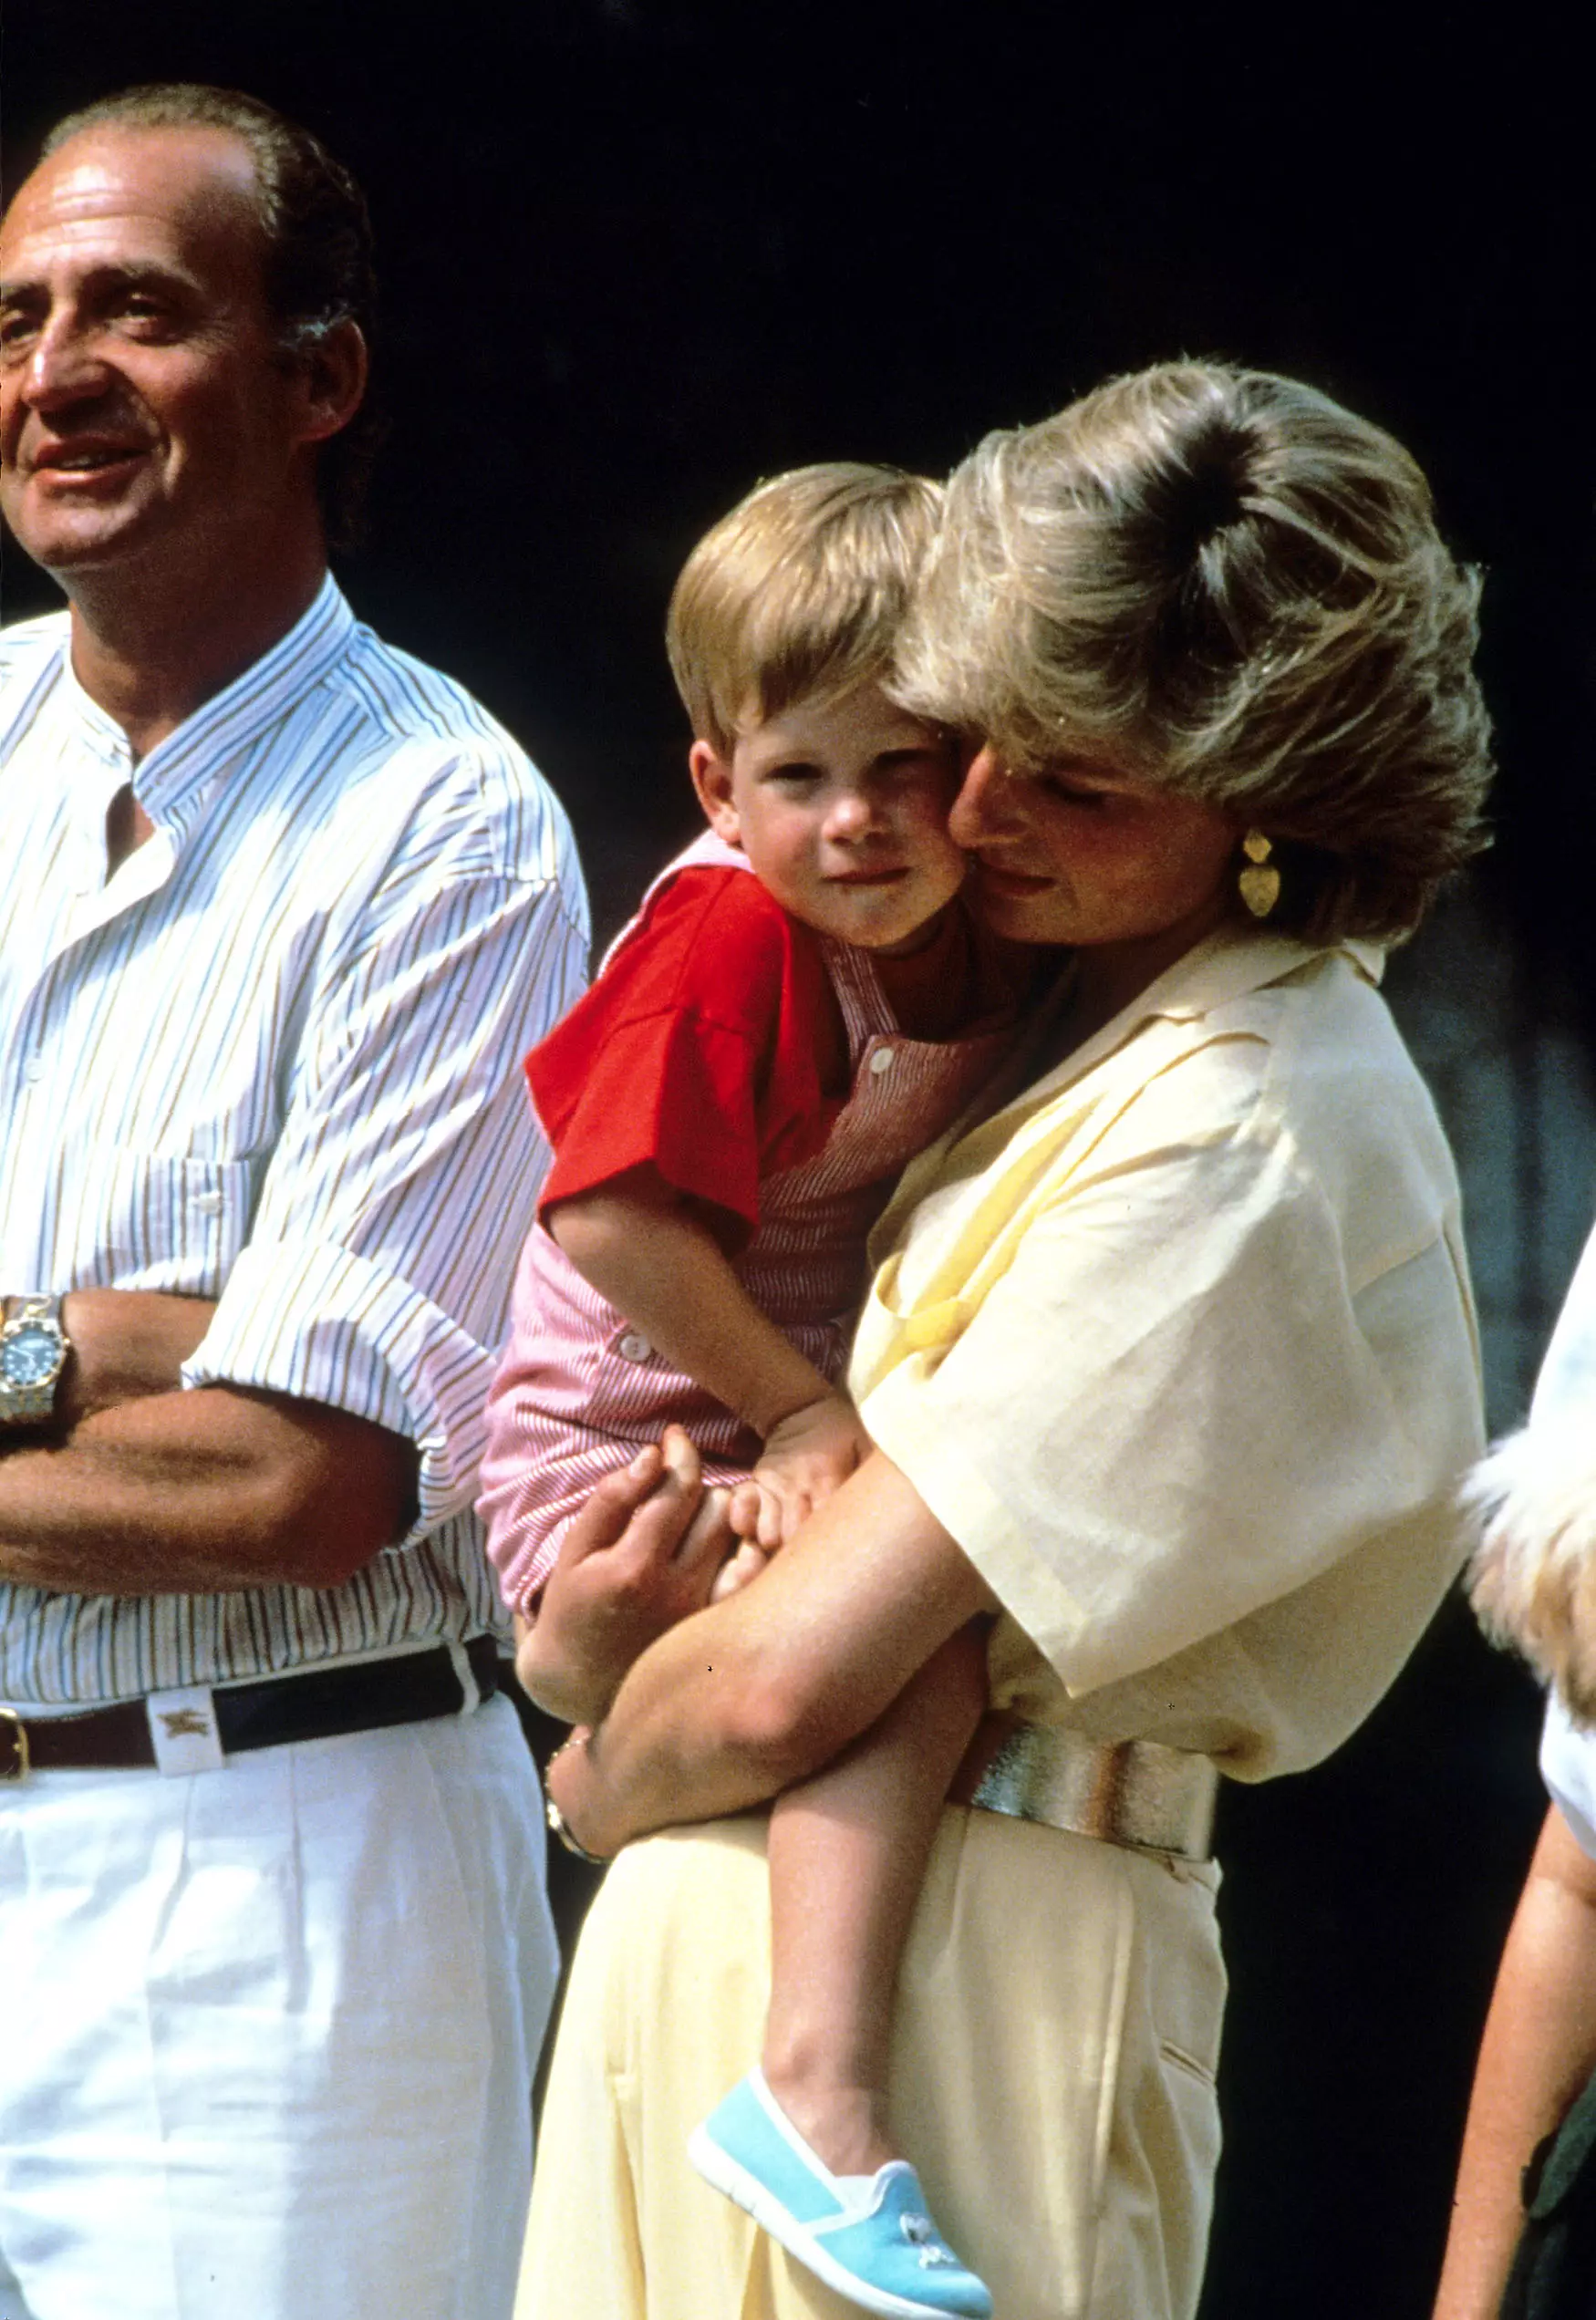 Princess Diana died in 1997 and specified her sons would each receive £10 million (